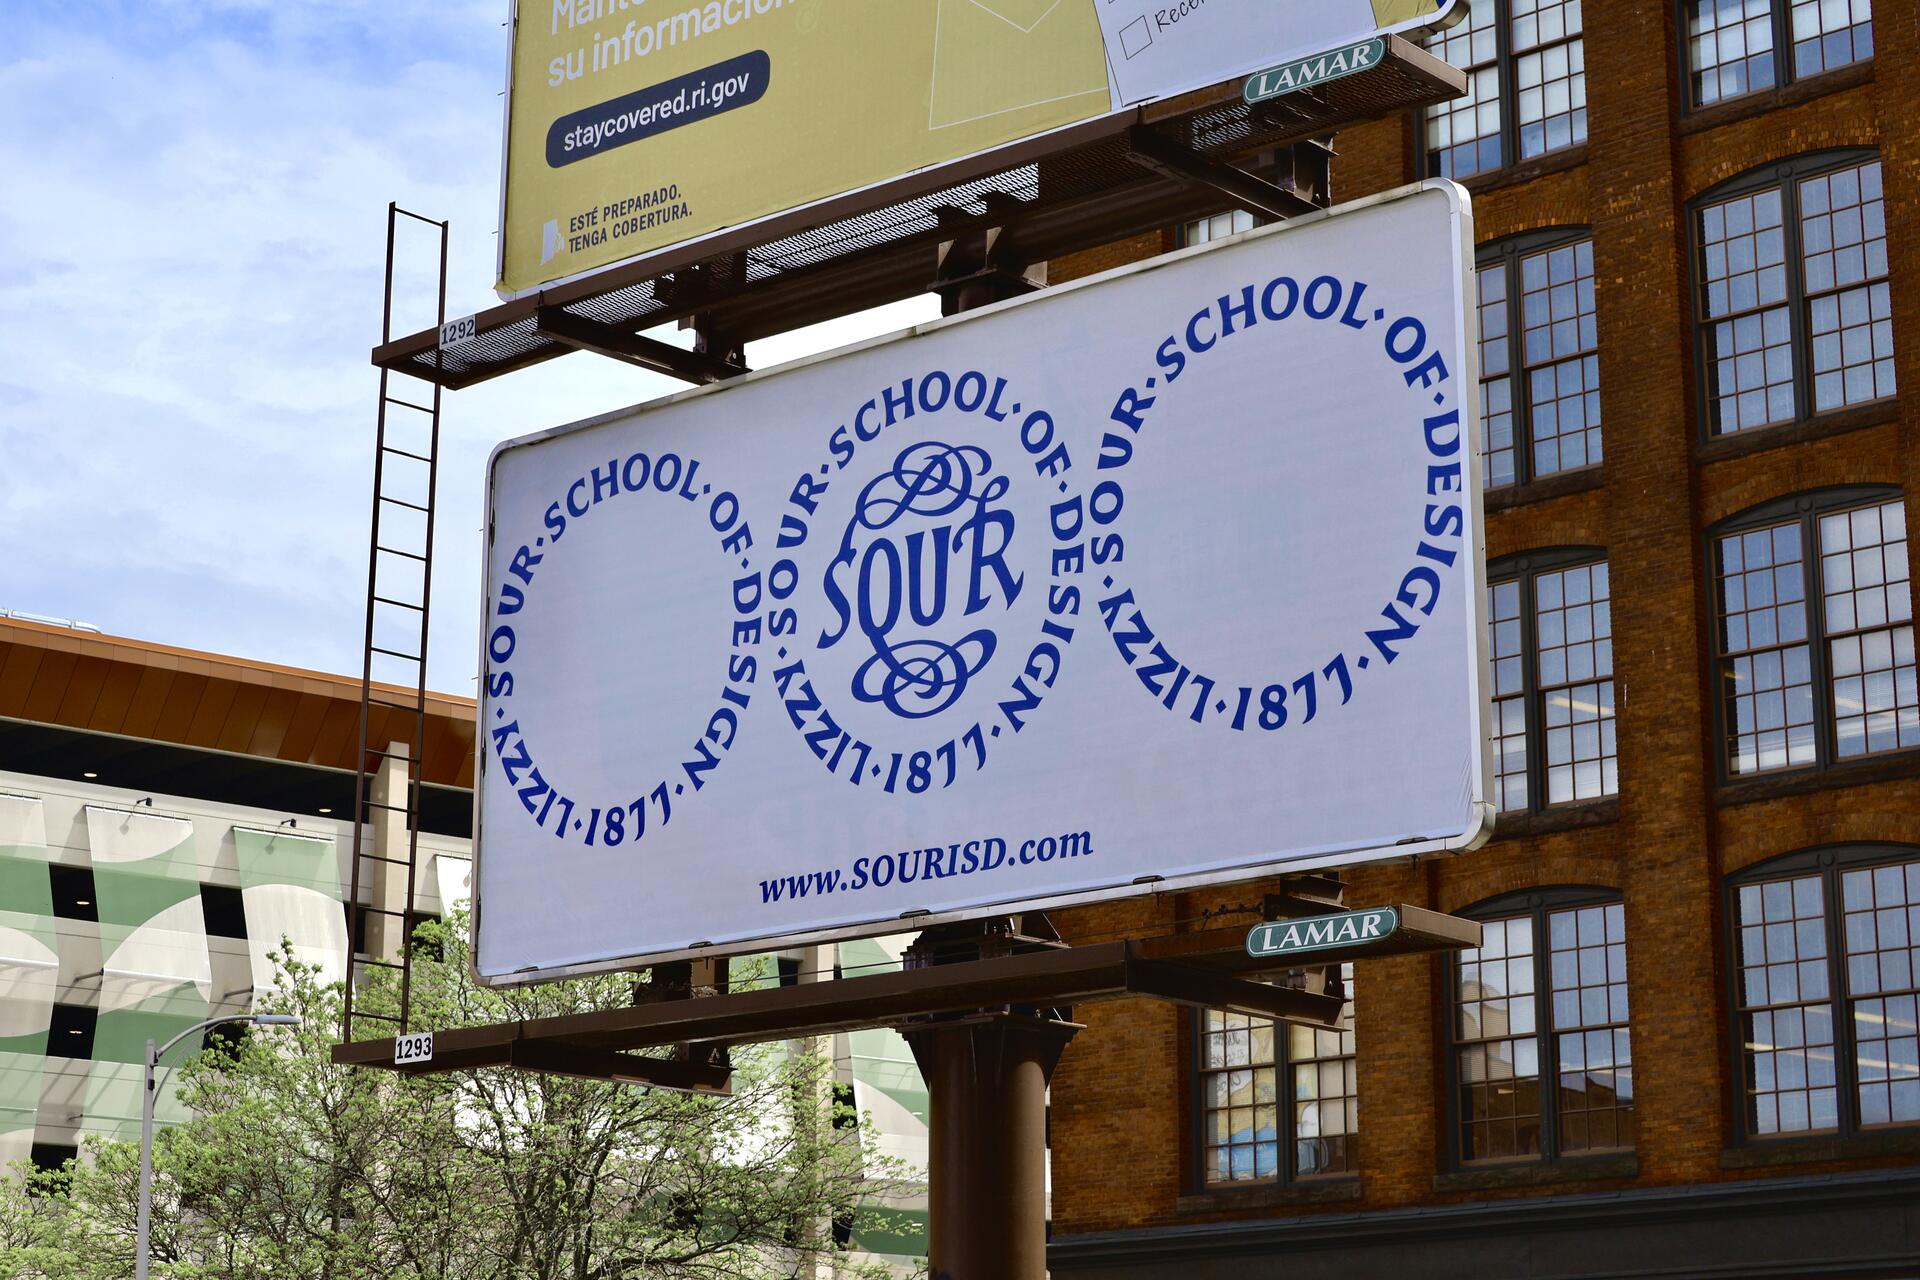 “The Lizzy Sour School of Design Billboard Project” (2024), advertisement posting will be displayed until early June. Located on the corner of Page & Pine Street in Downtown Providence. Visit the website, www.SOURISD.com to learn more!